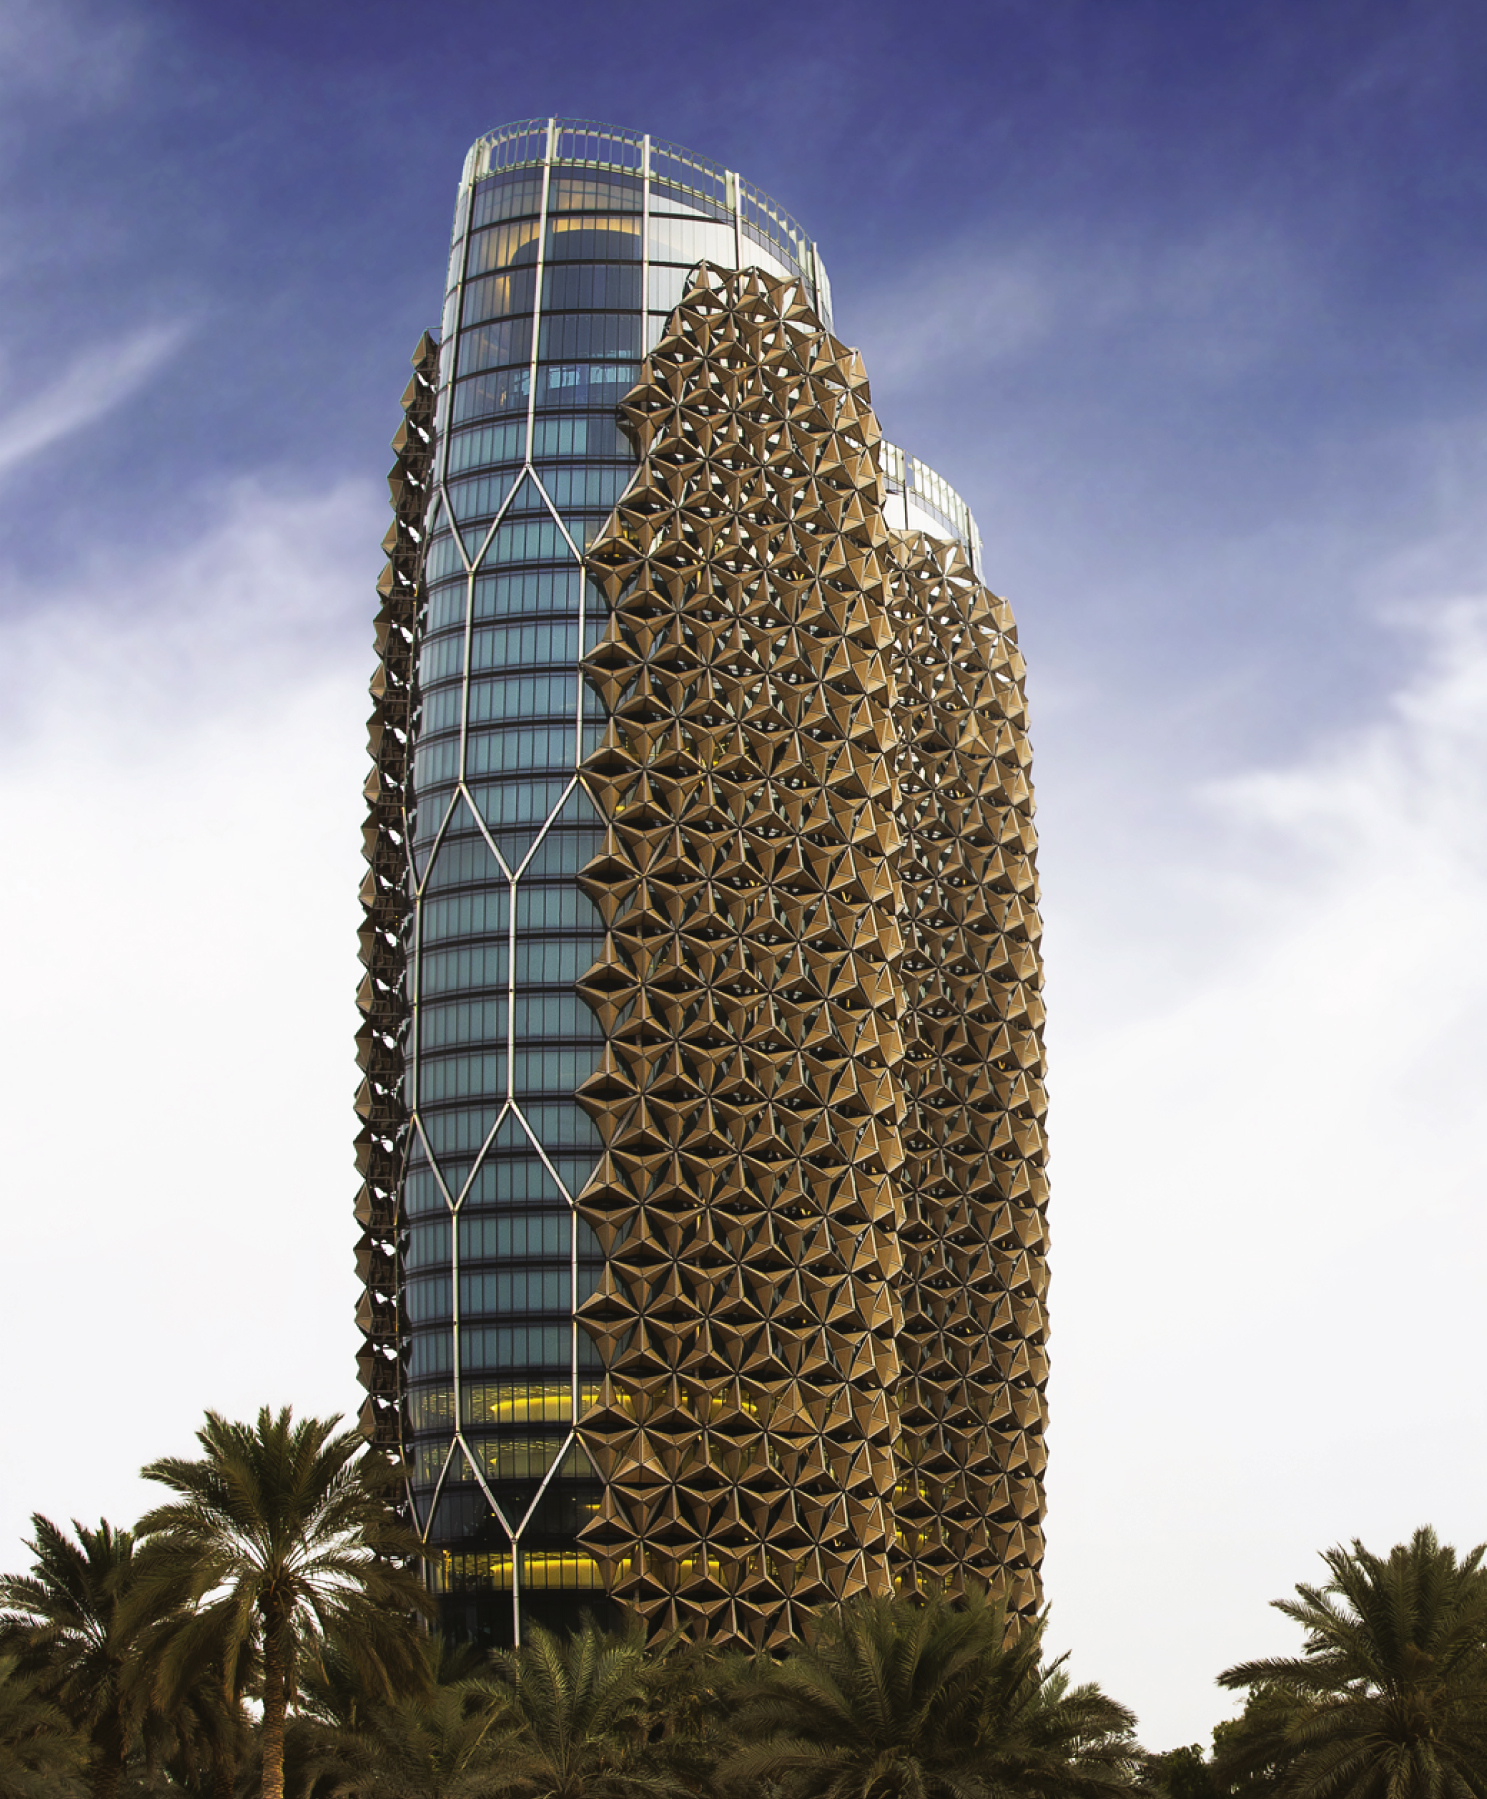 The Al-Bahr Towers is a high performance design inspired by its context.